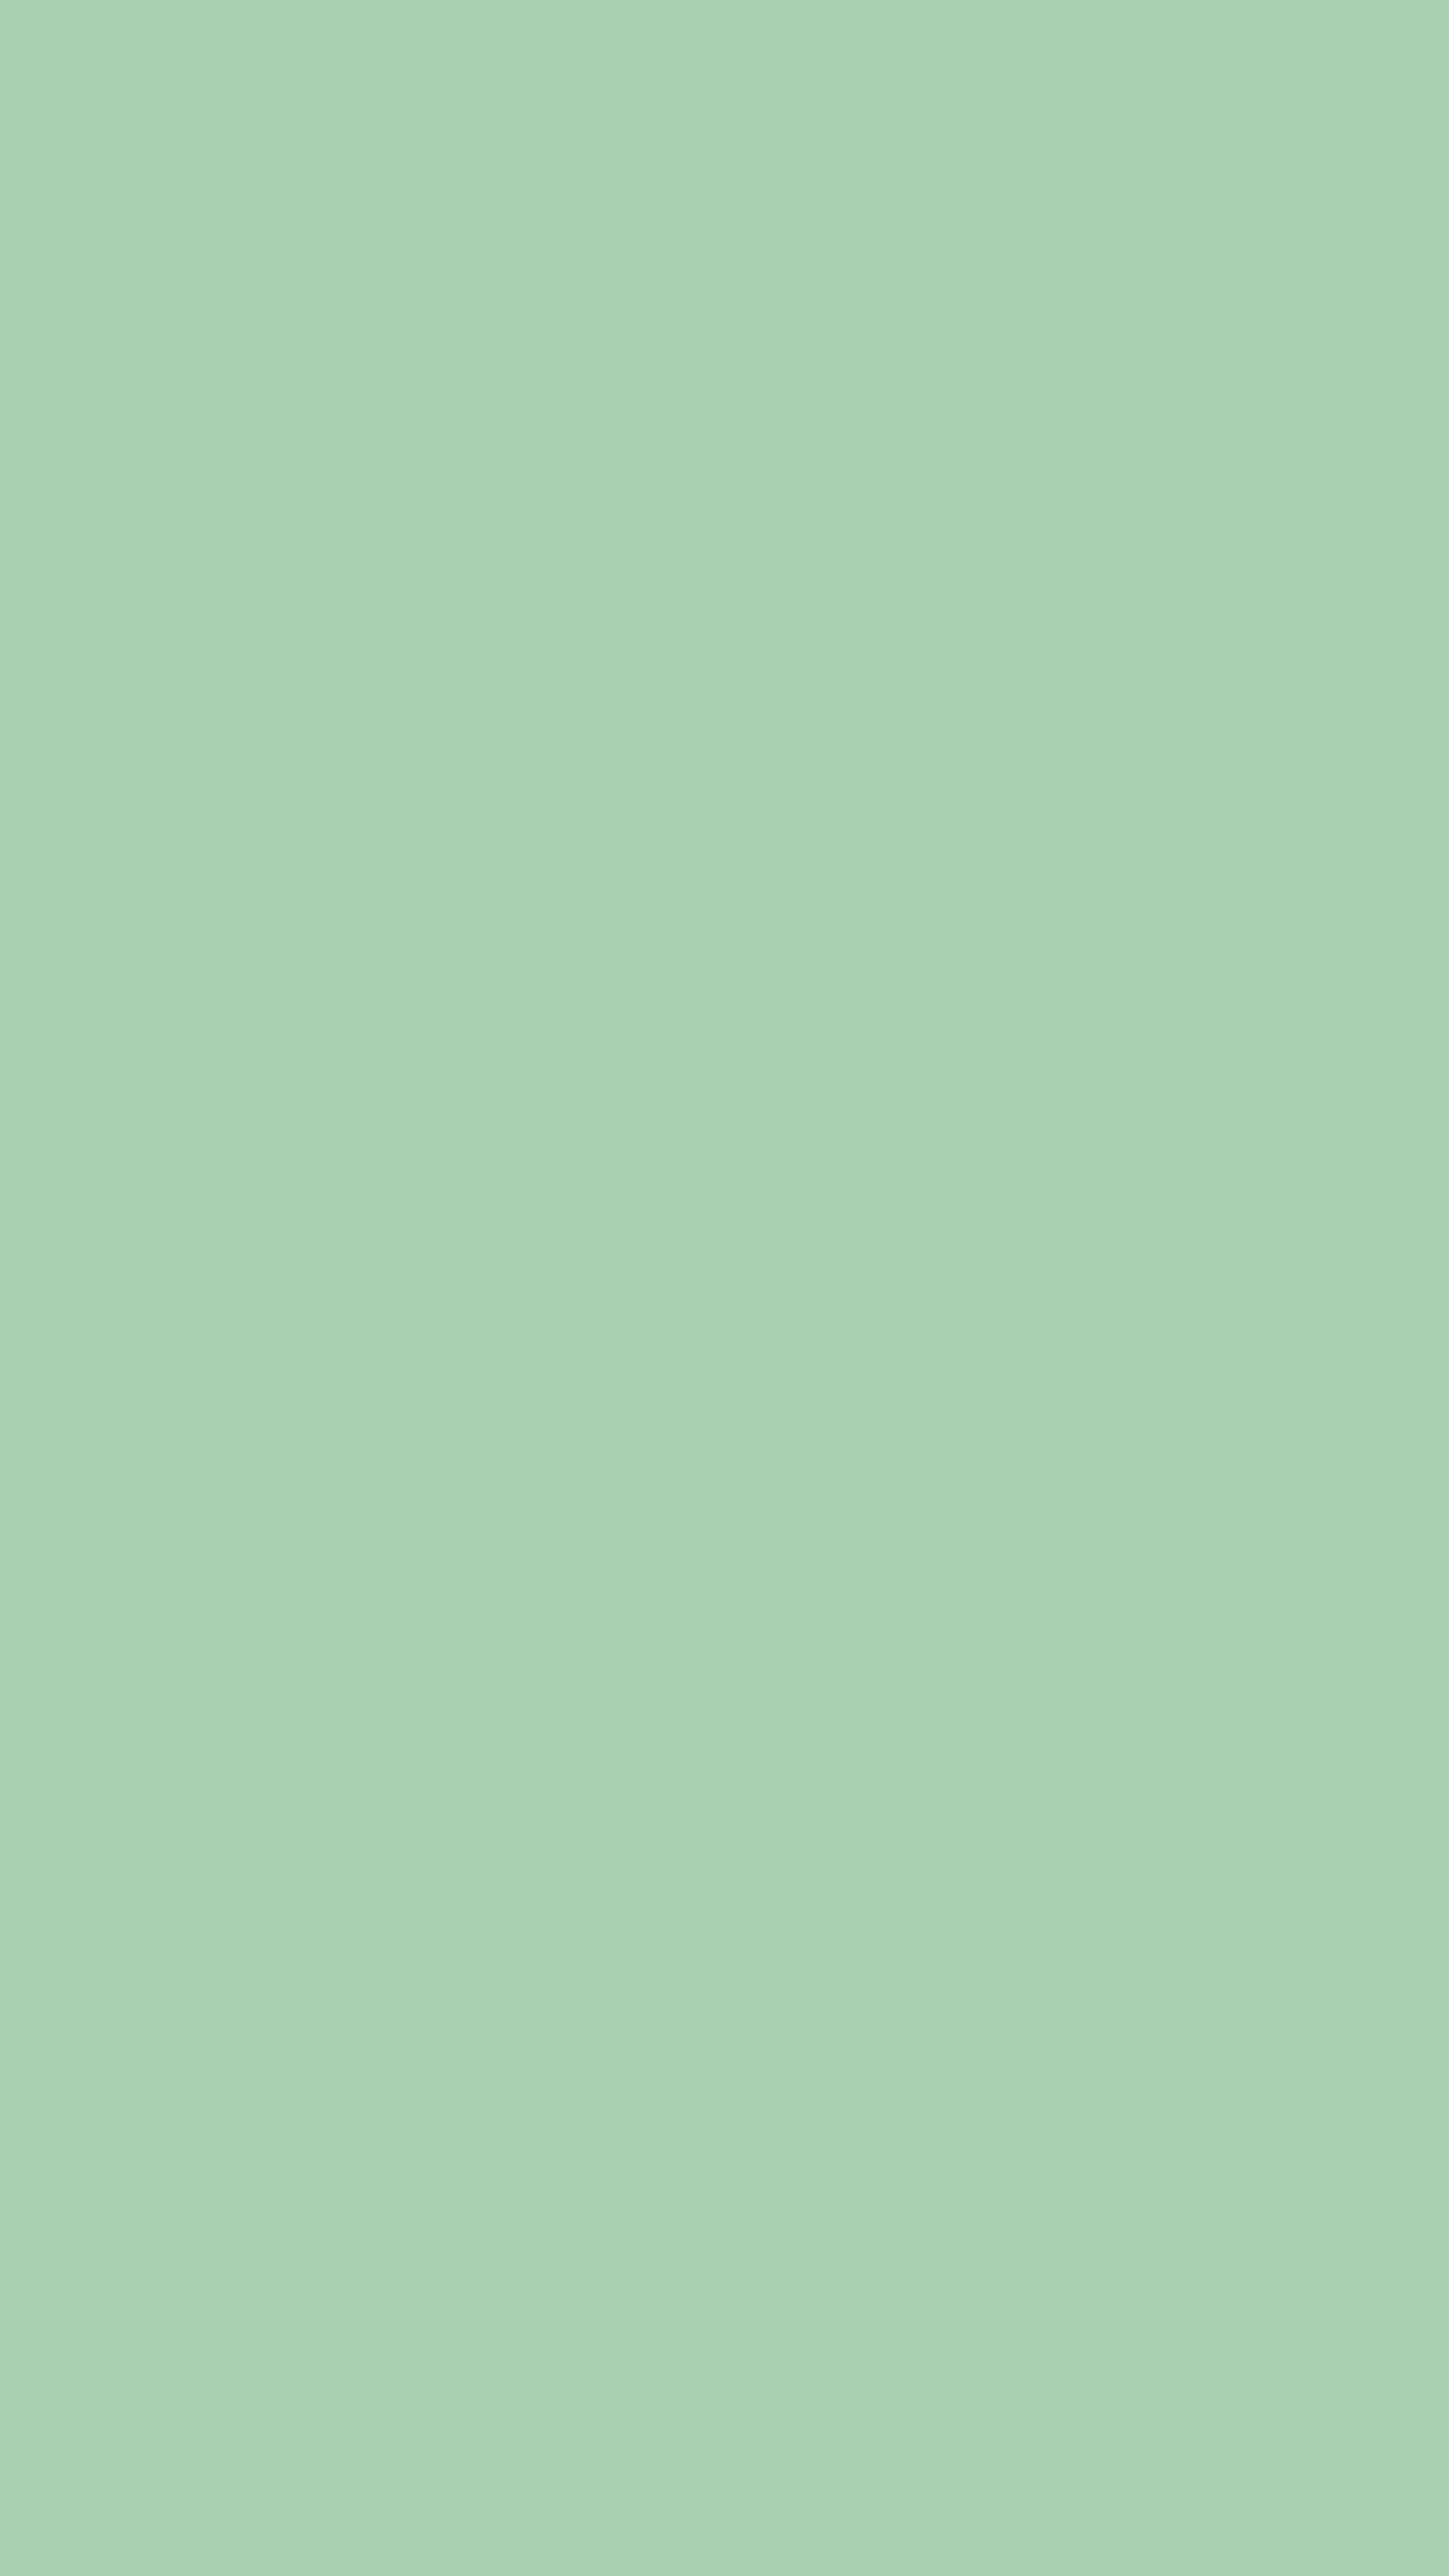 Sage Green Background Images  Free Photos PNG Stickers Wallpapers   Backgrounds  rawpixel